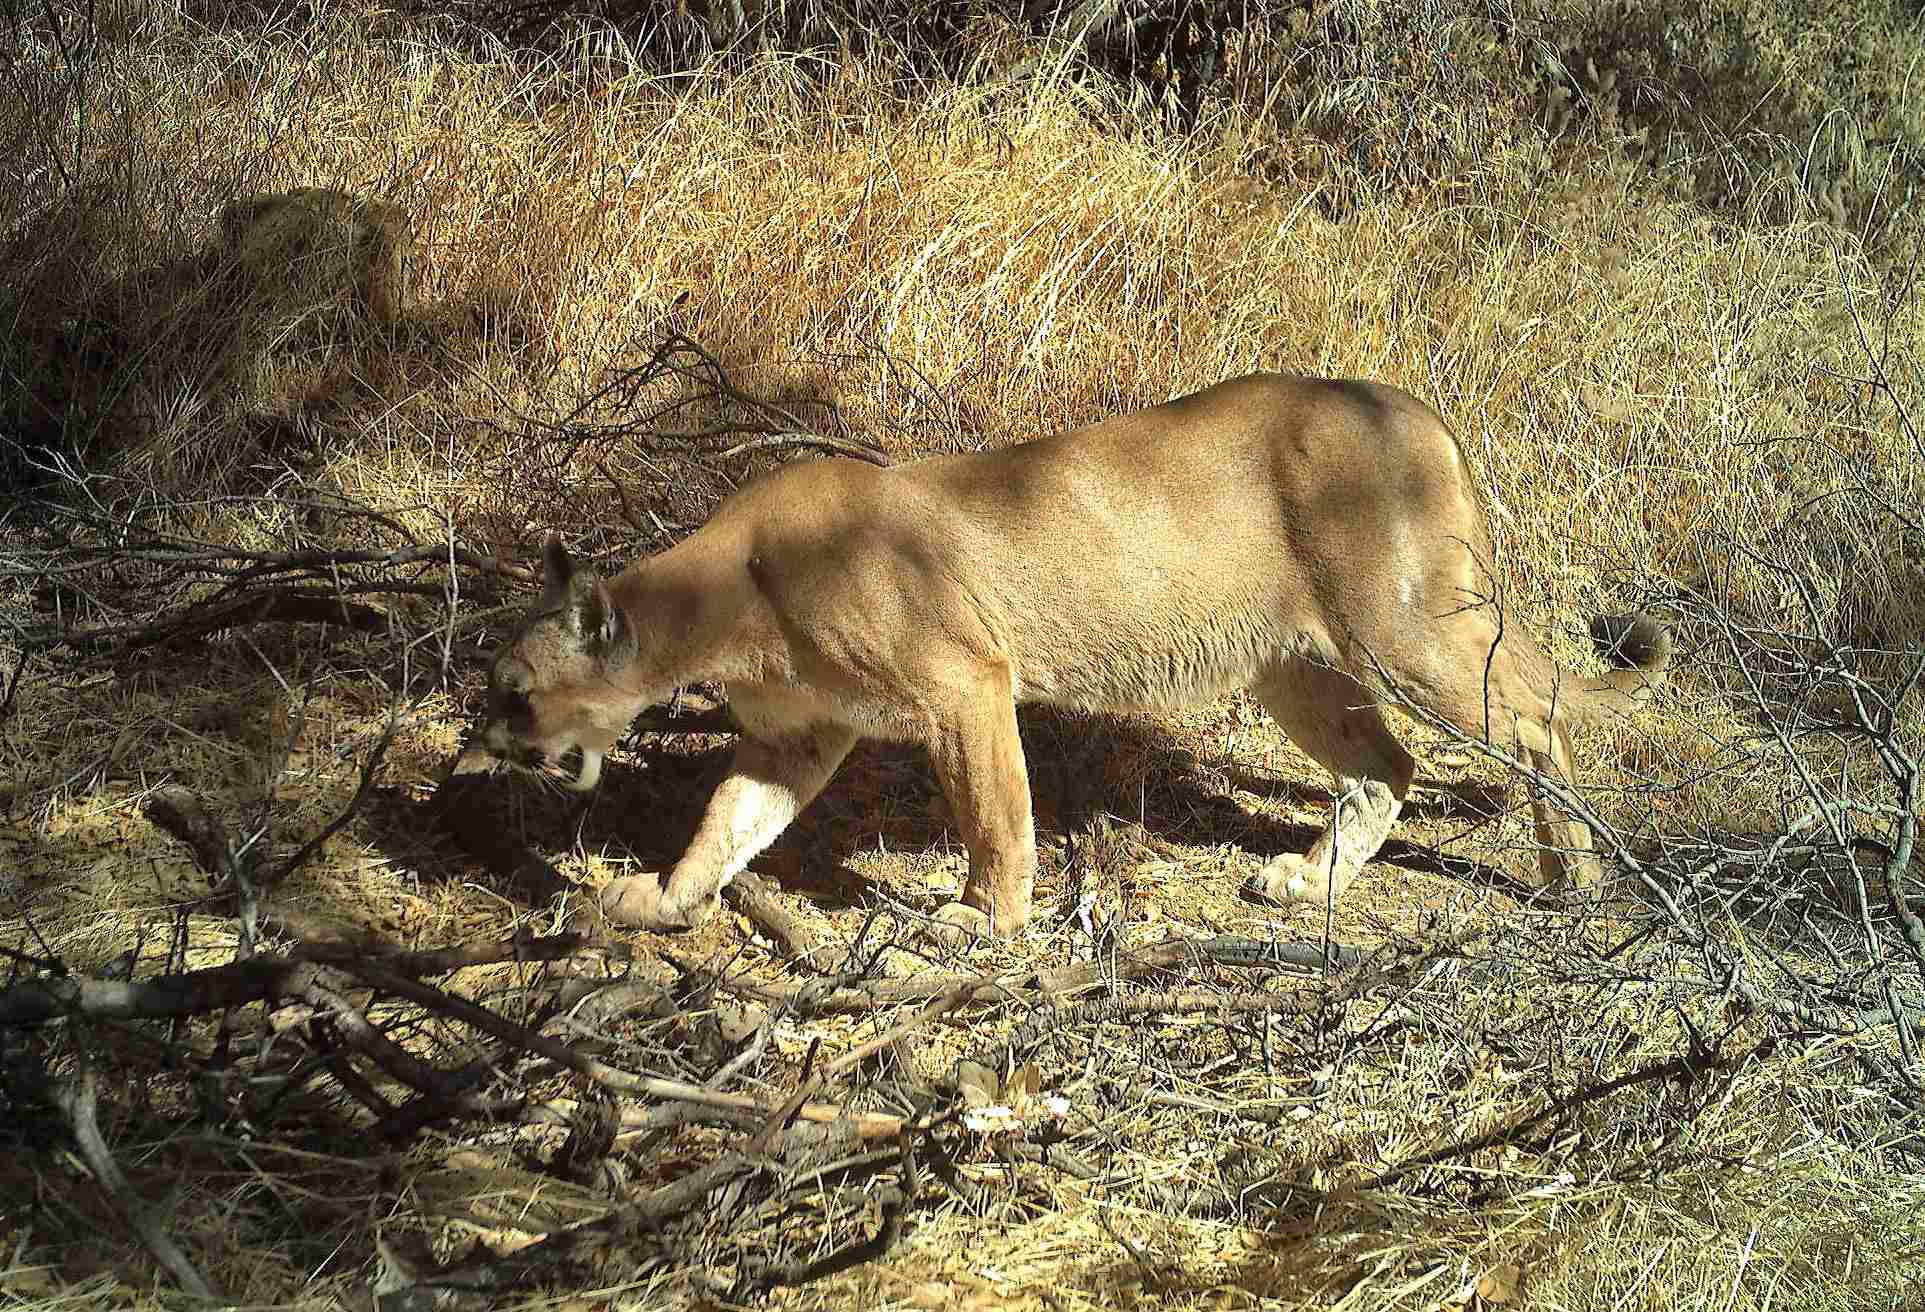 Mountain Lion Vs Cheetah: Both Mountain Lions and Cheetahs Can be Found in Grasslands (Credit: Santa Monica Mountains National Recreation Area 2022 .CC BY 2.0.)